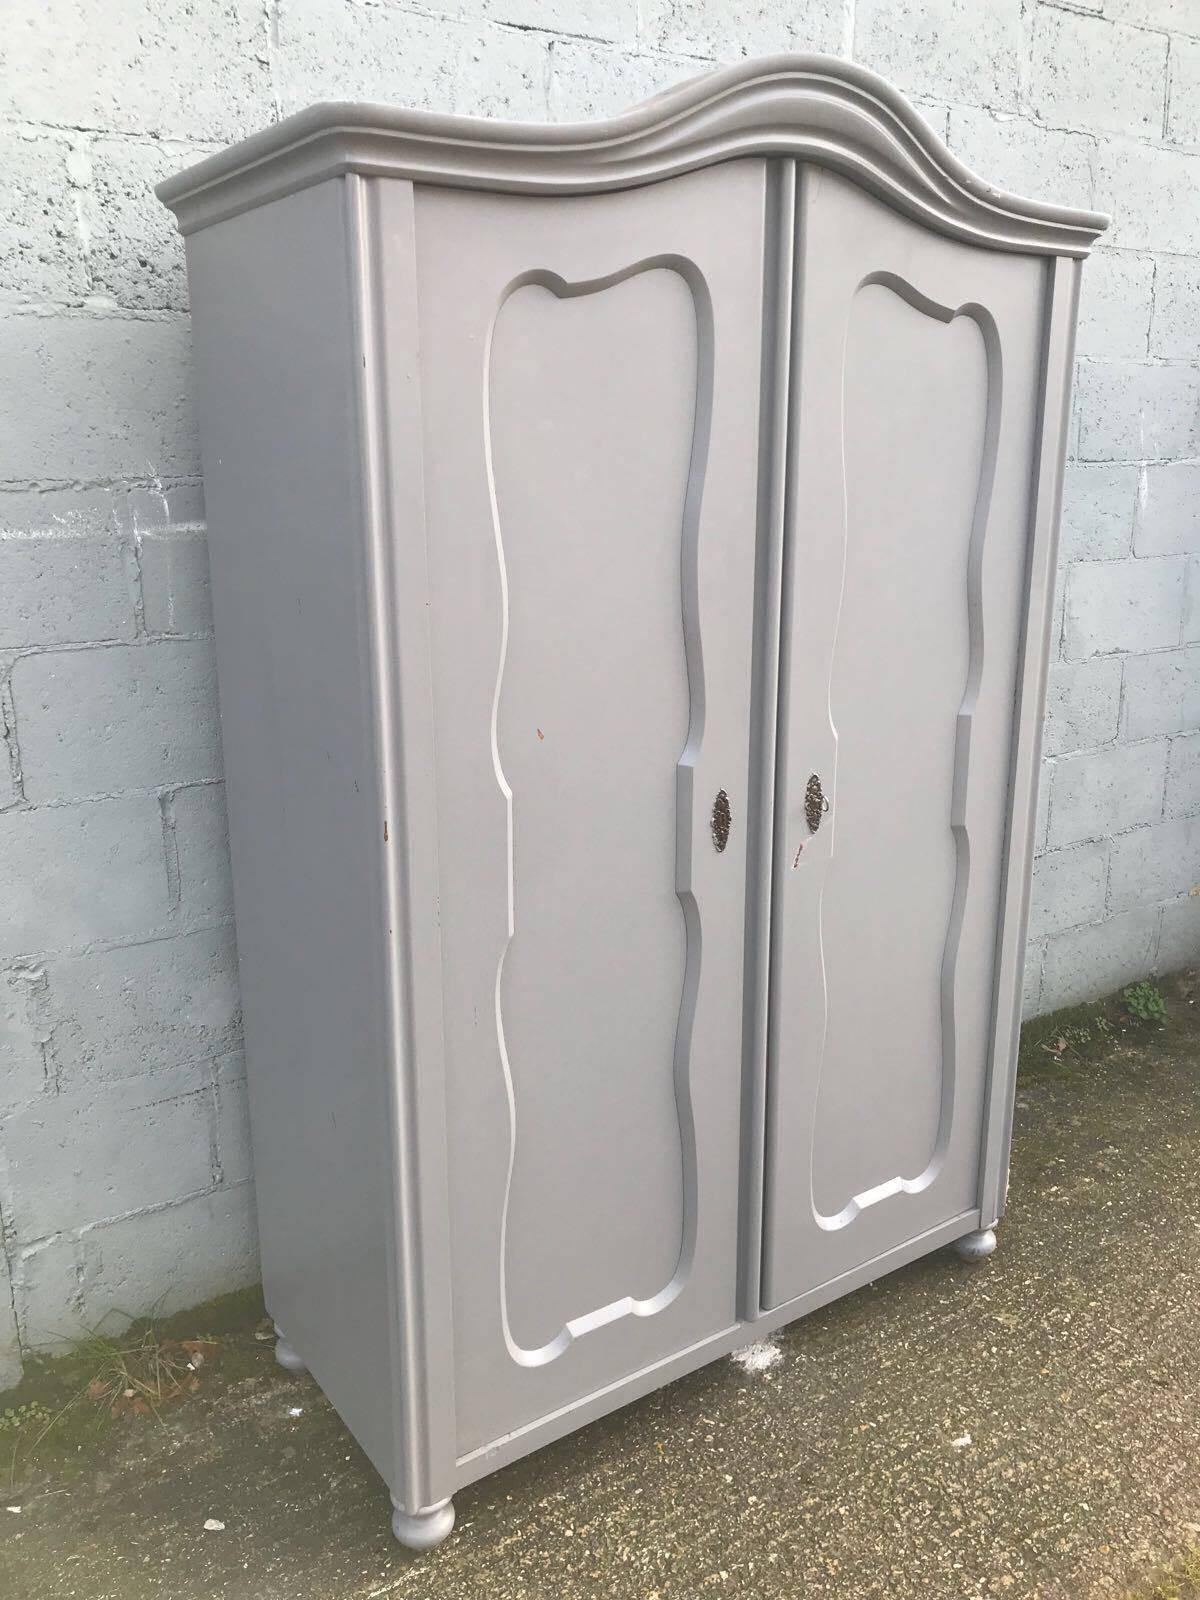 This is a beautiful French larder/cupboard or wardrobe.



It's been painted in grey color, slightly distressed.



Single carved door opens up to good storage. Can be fitted with shelves or hanging rails as an extra, if